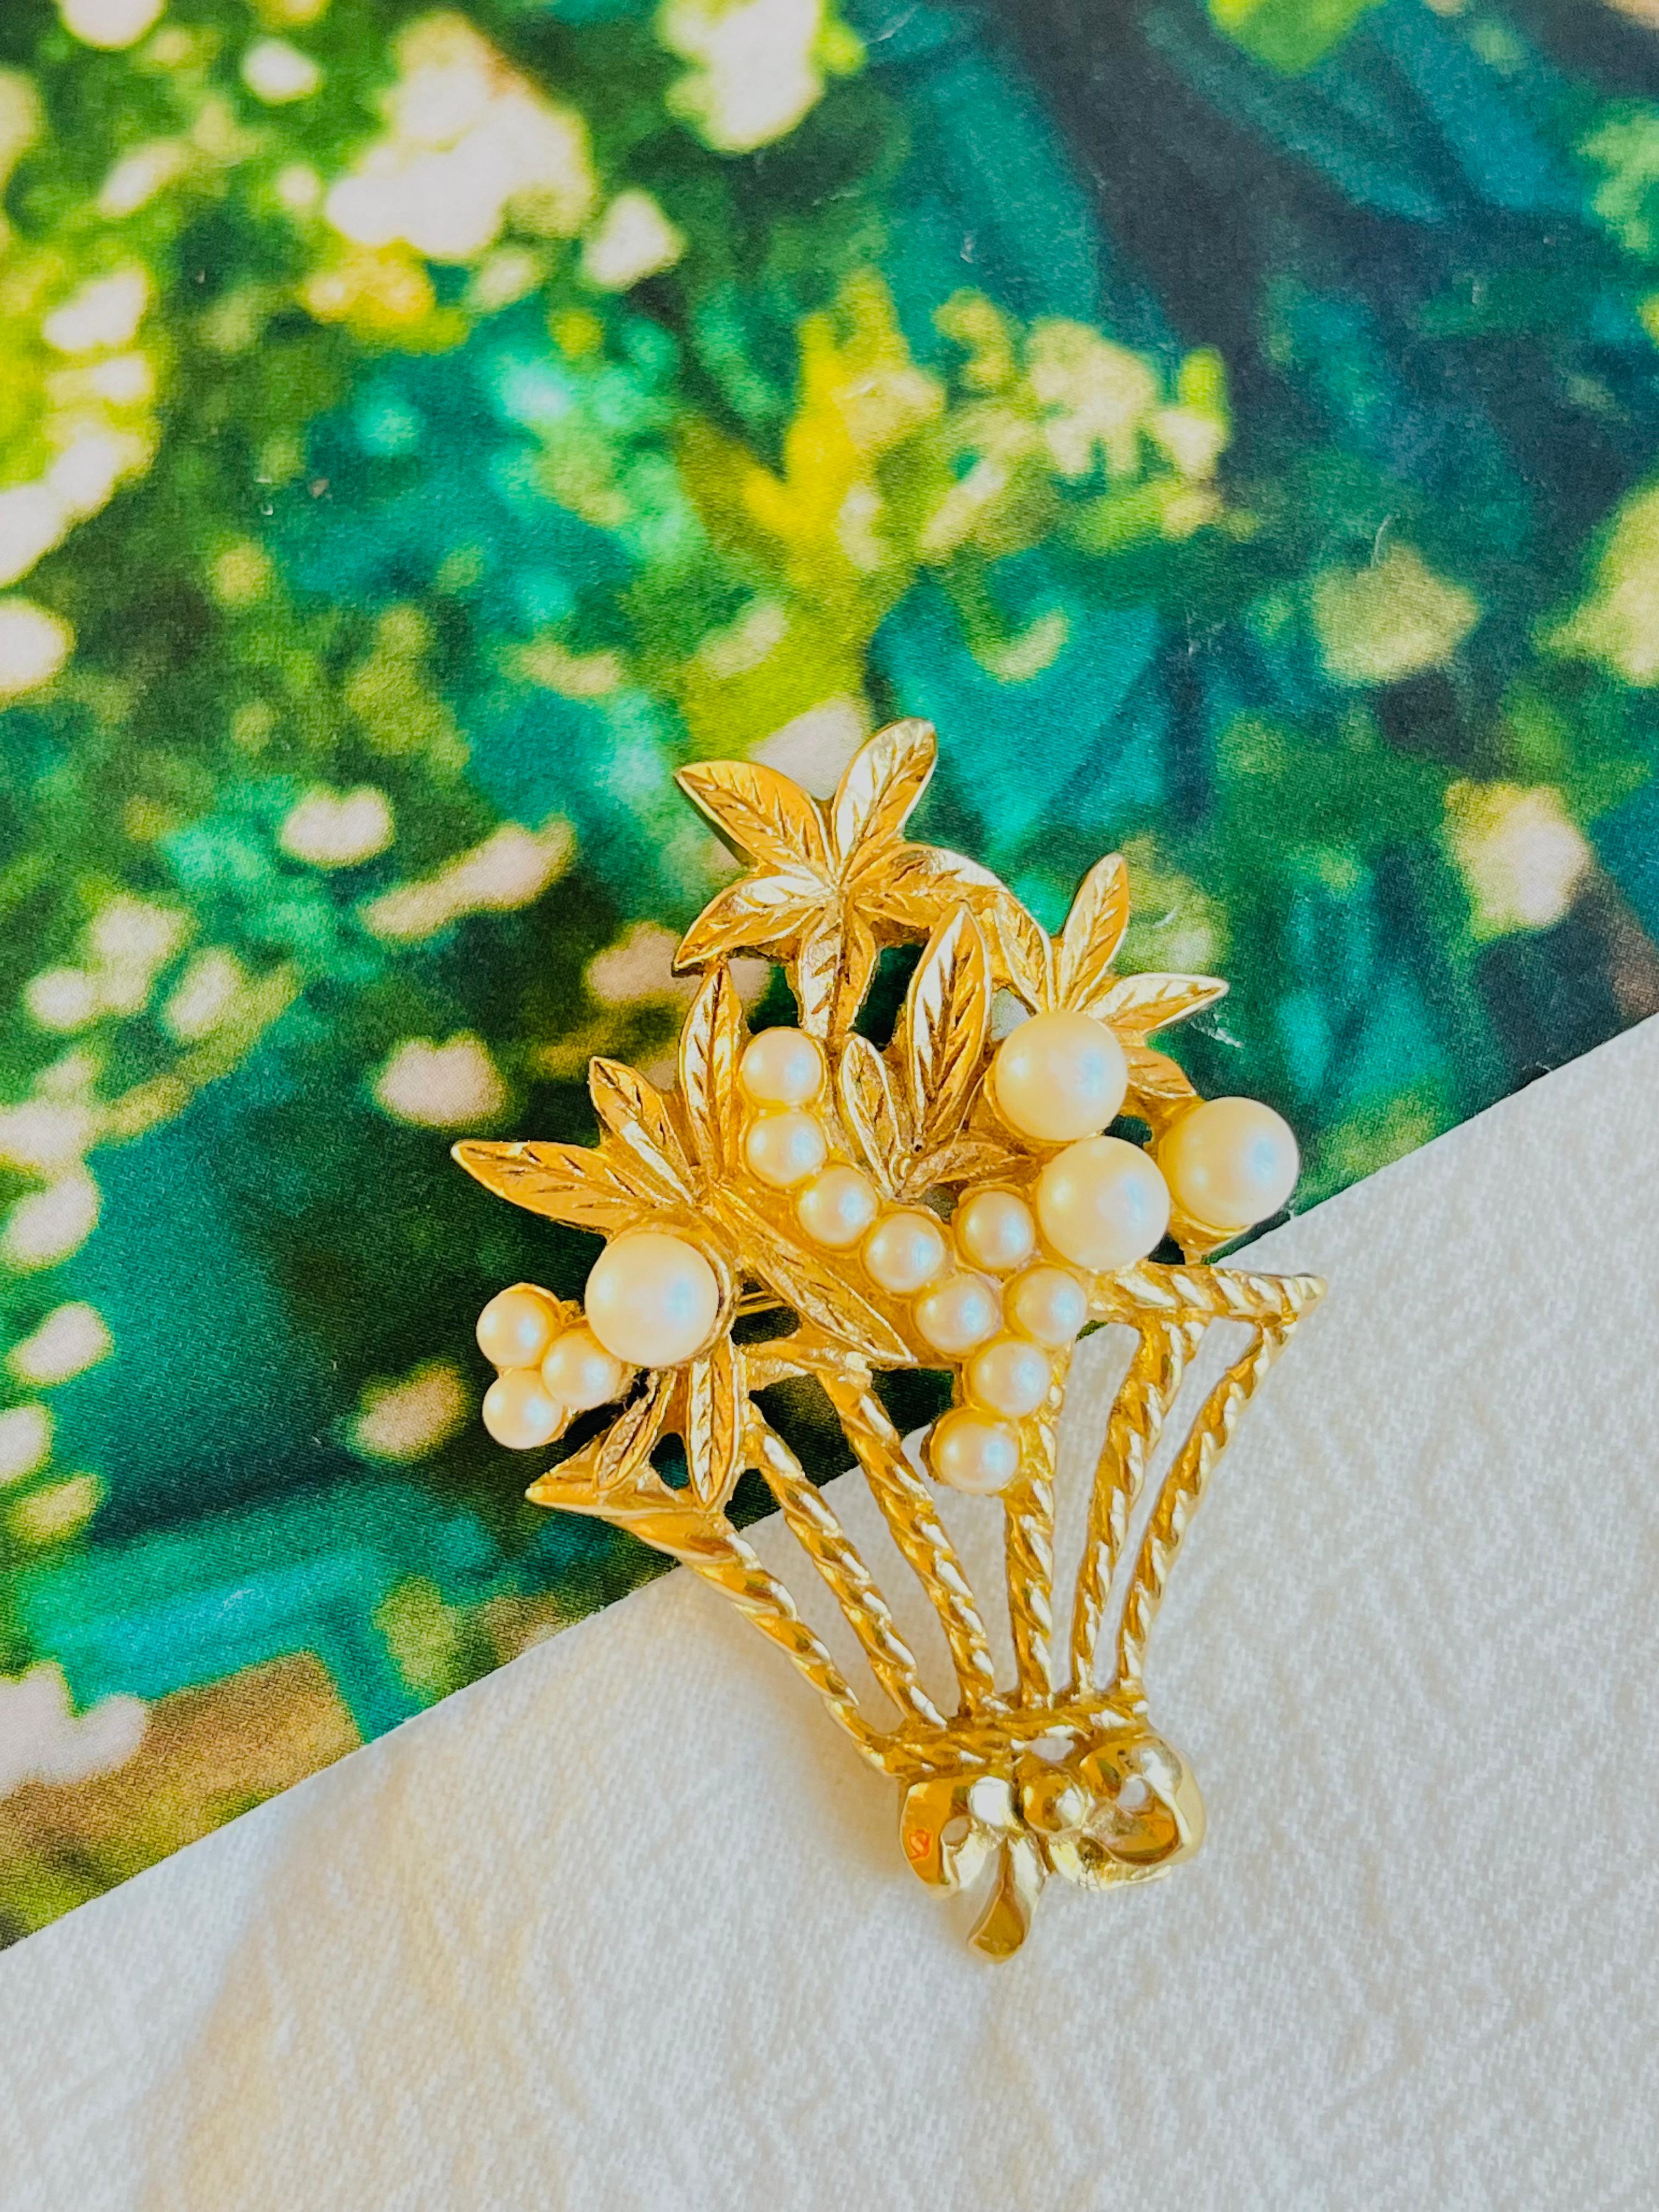 Very good condition. 100% Genuine.

A unique piece. This is gold plated stylised brooch. Rare to find.

Safety-catch pin closure.

Size: 3.3 cm x 4.8 cm.

Weight: 13.0 g.

_ _ _

Great for everyday wear. Come with velvet pouch and beautiful